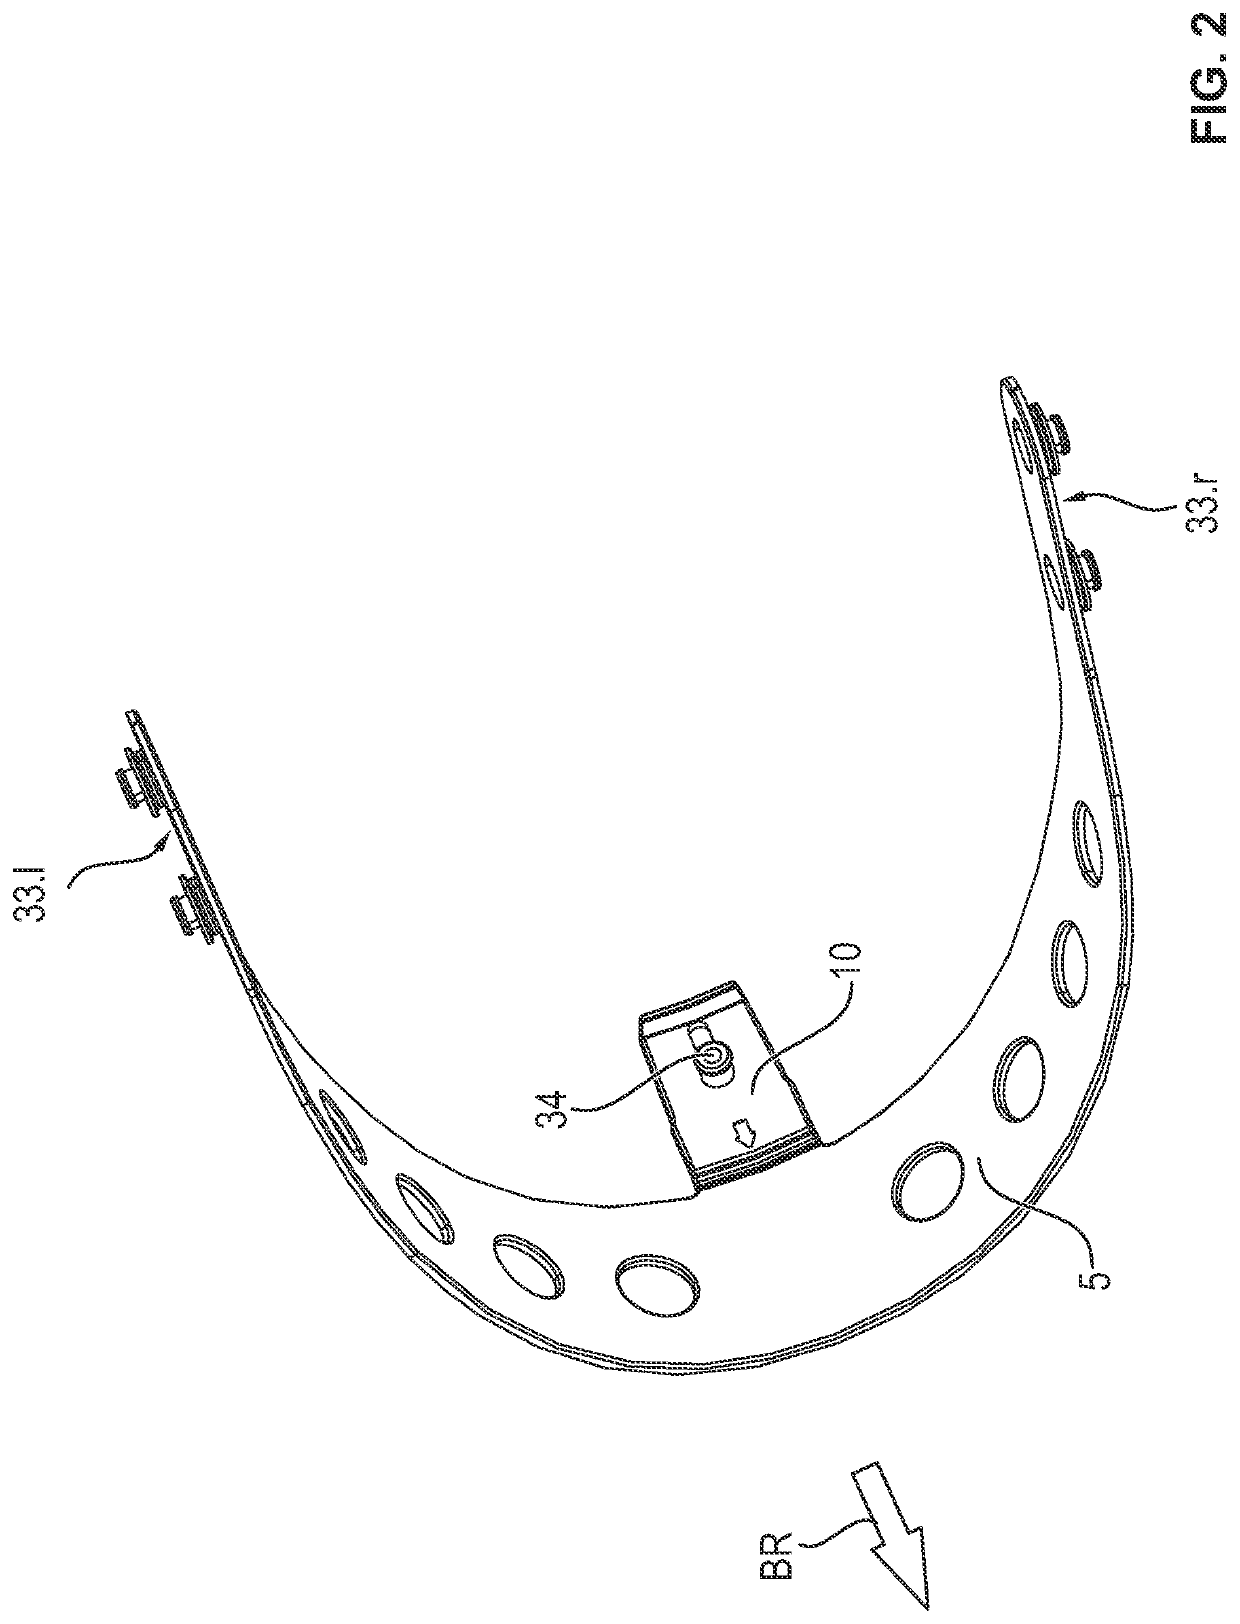 Safety helmet with a sheathed bearing element, process for removing the sheathing from the safety helmet and process for manufacturing such a safety helmet